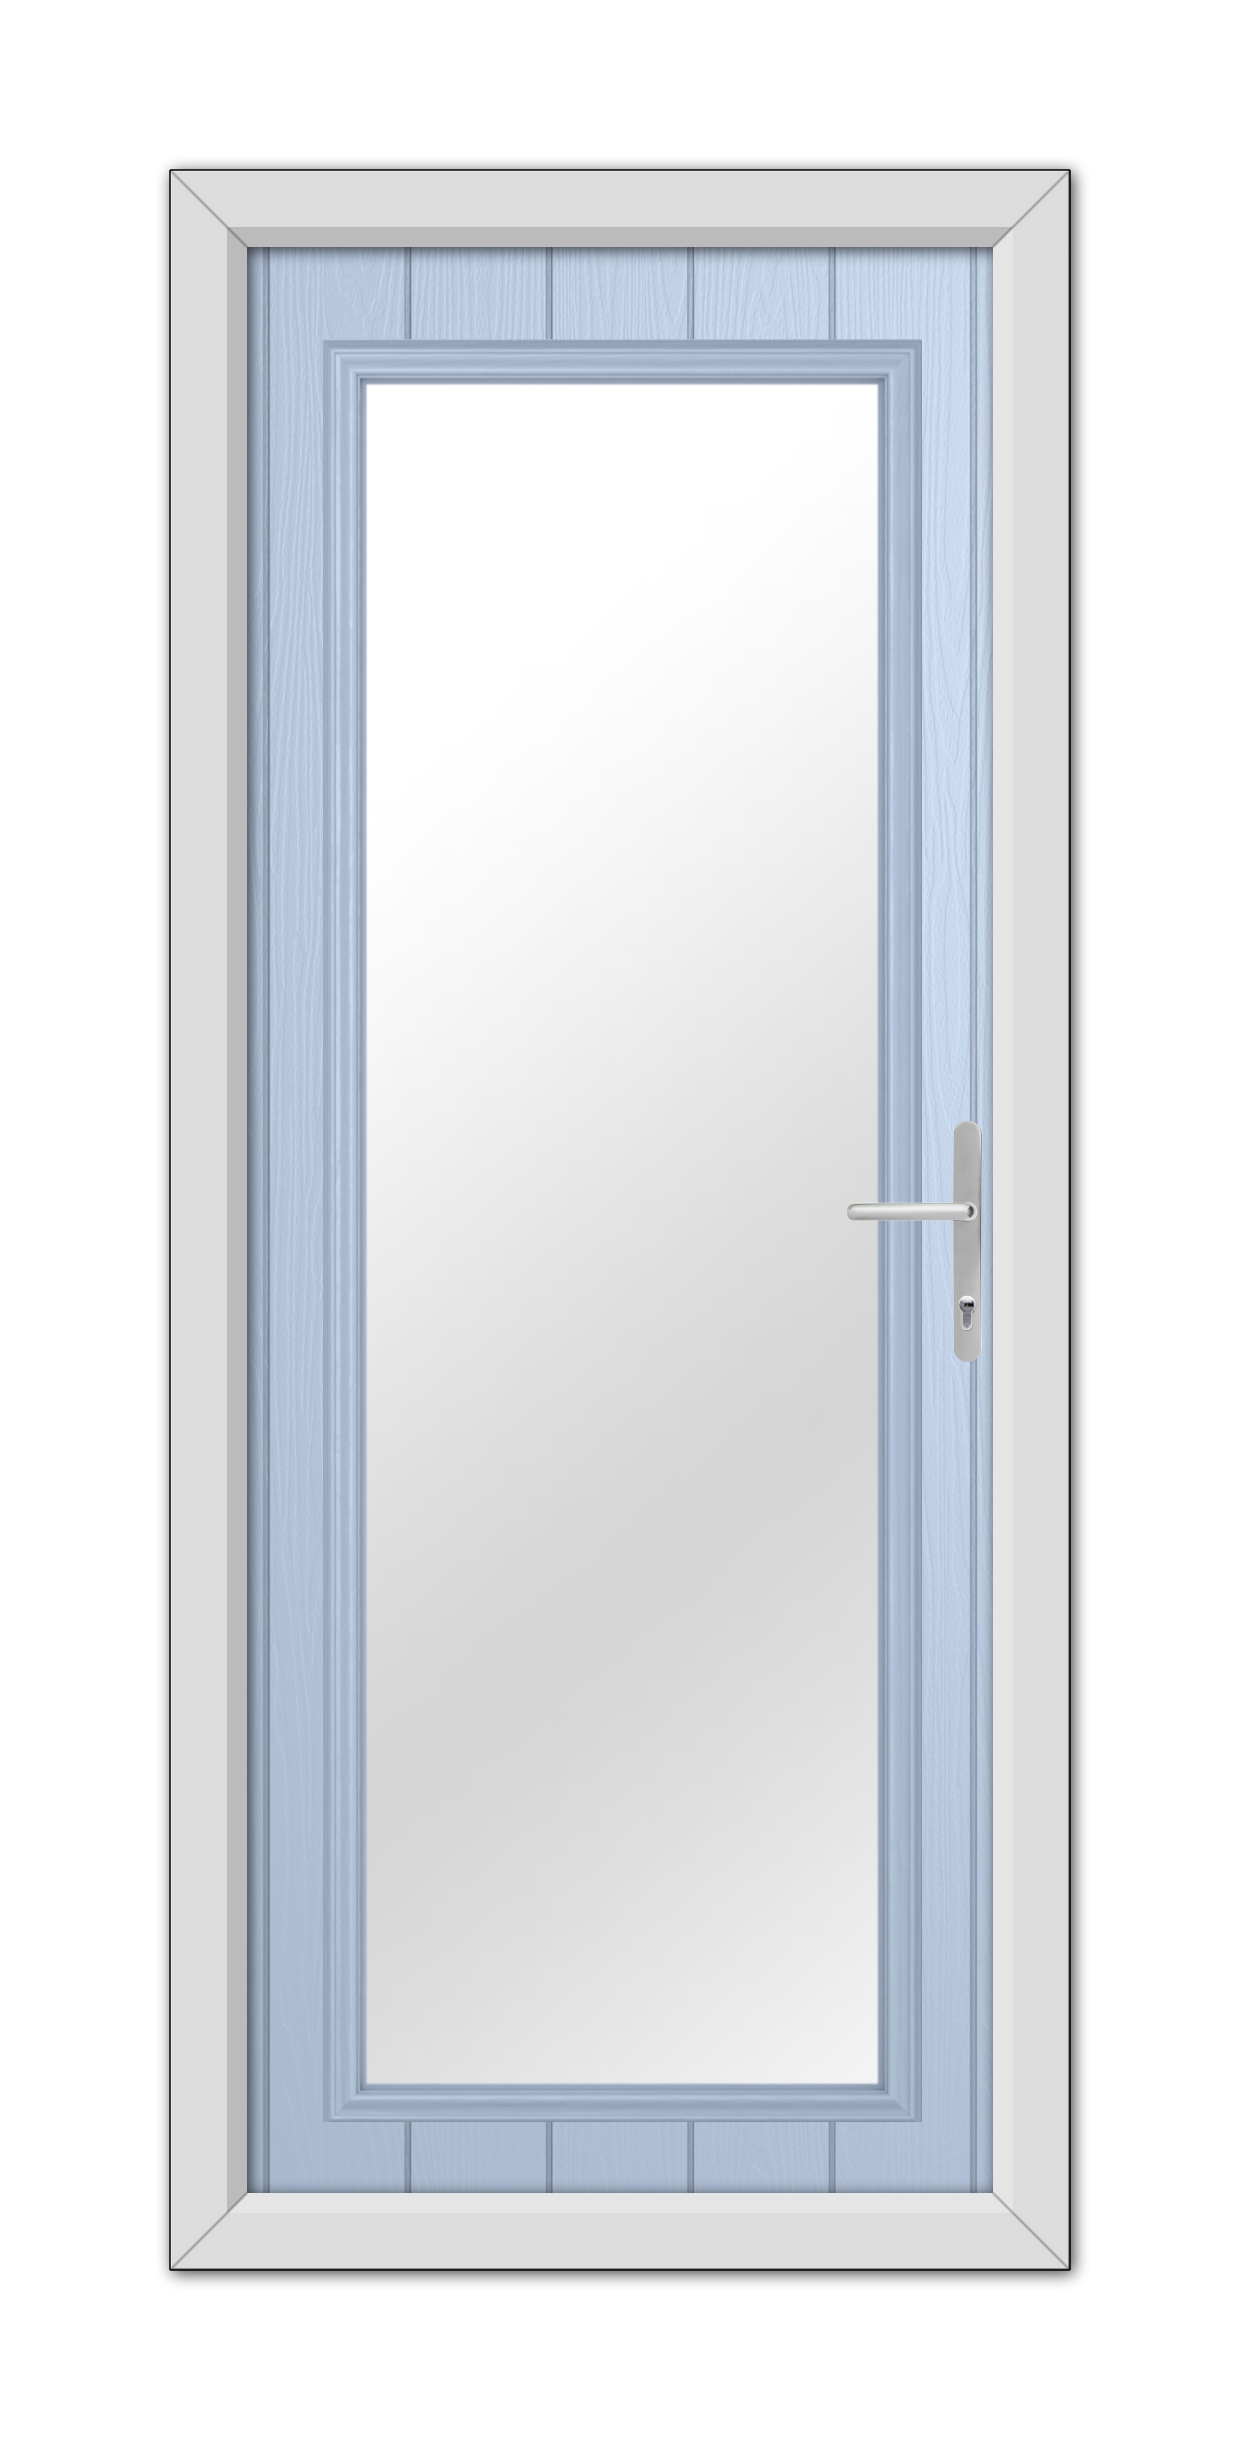 A Duck Egg Blue Hatton Composite Door 48mm Timber Core with a large vertical glass panel and a silver handle, set in a white frame.